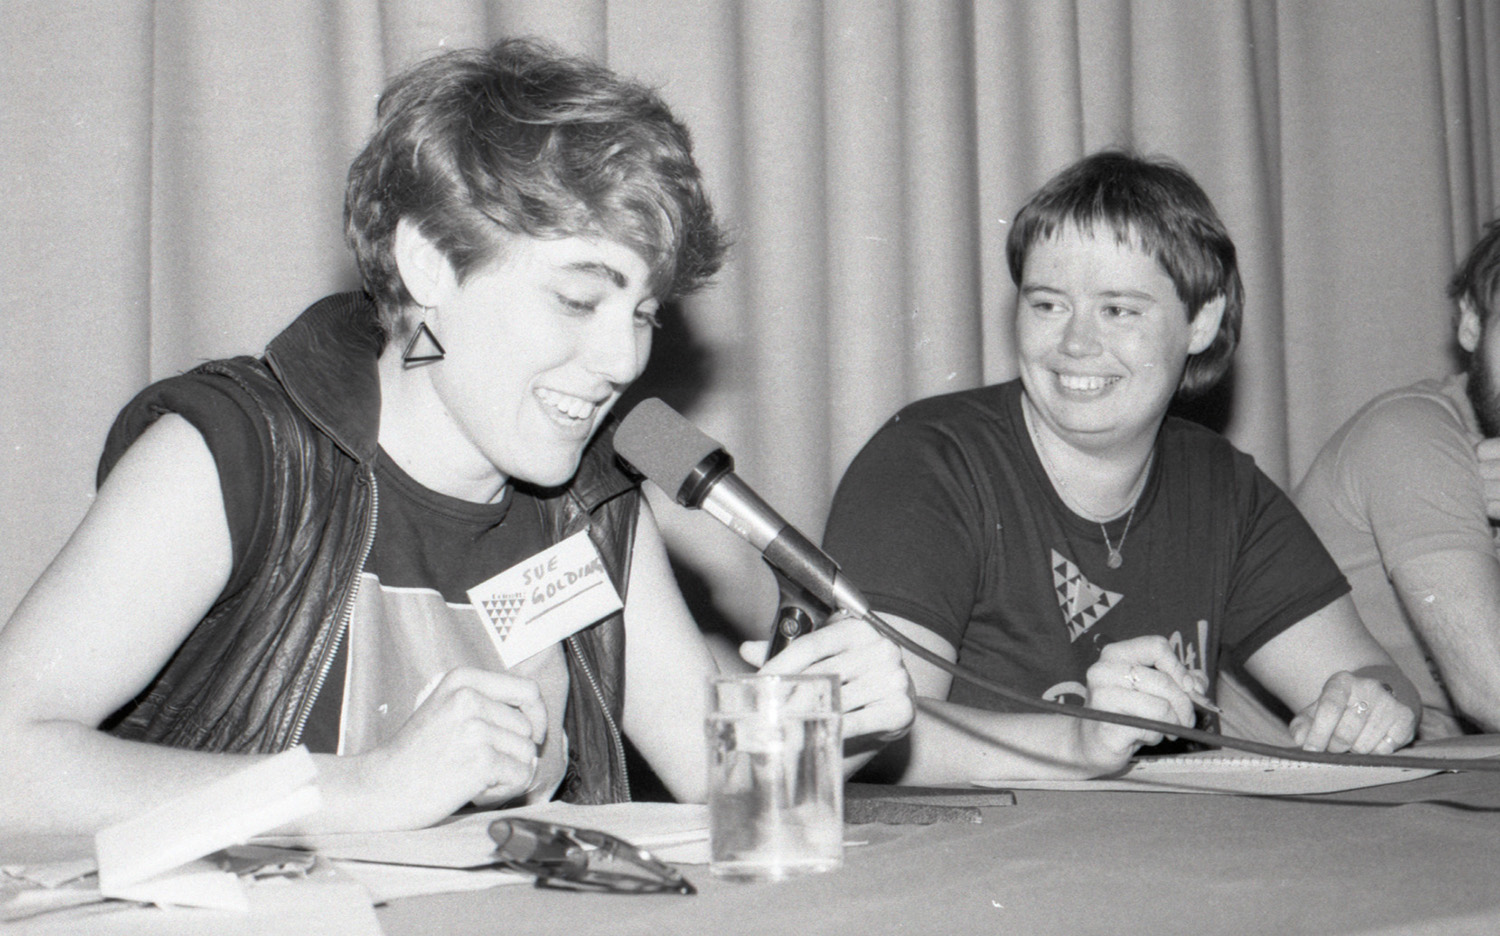 Two young women seated at a table talk into a microphone.